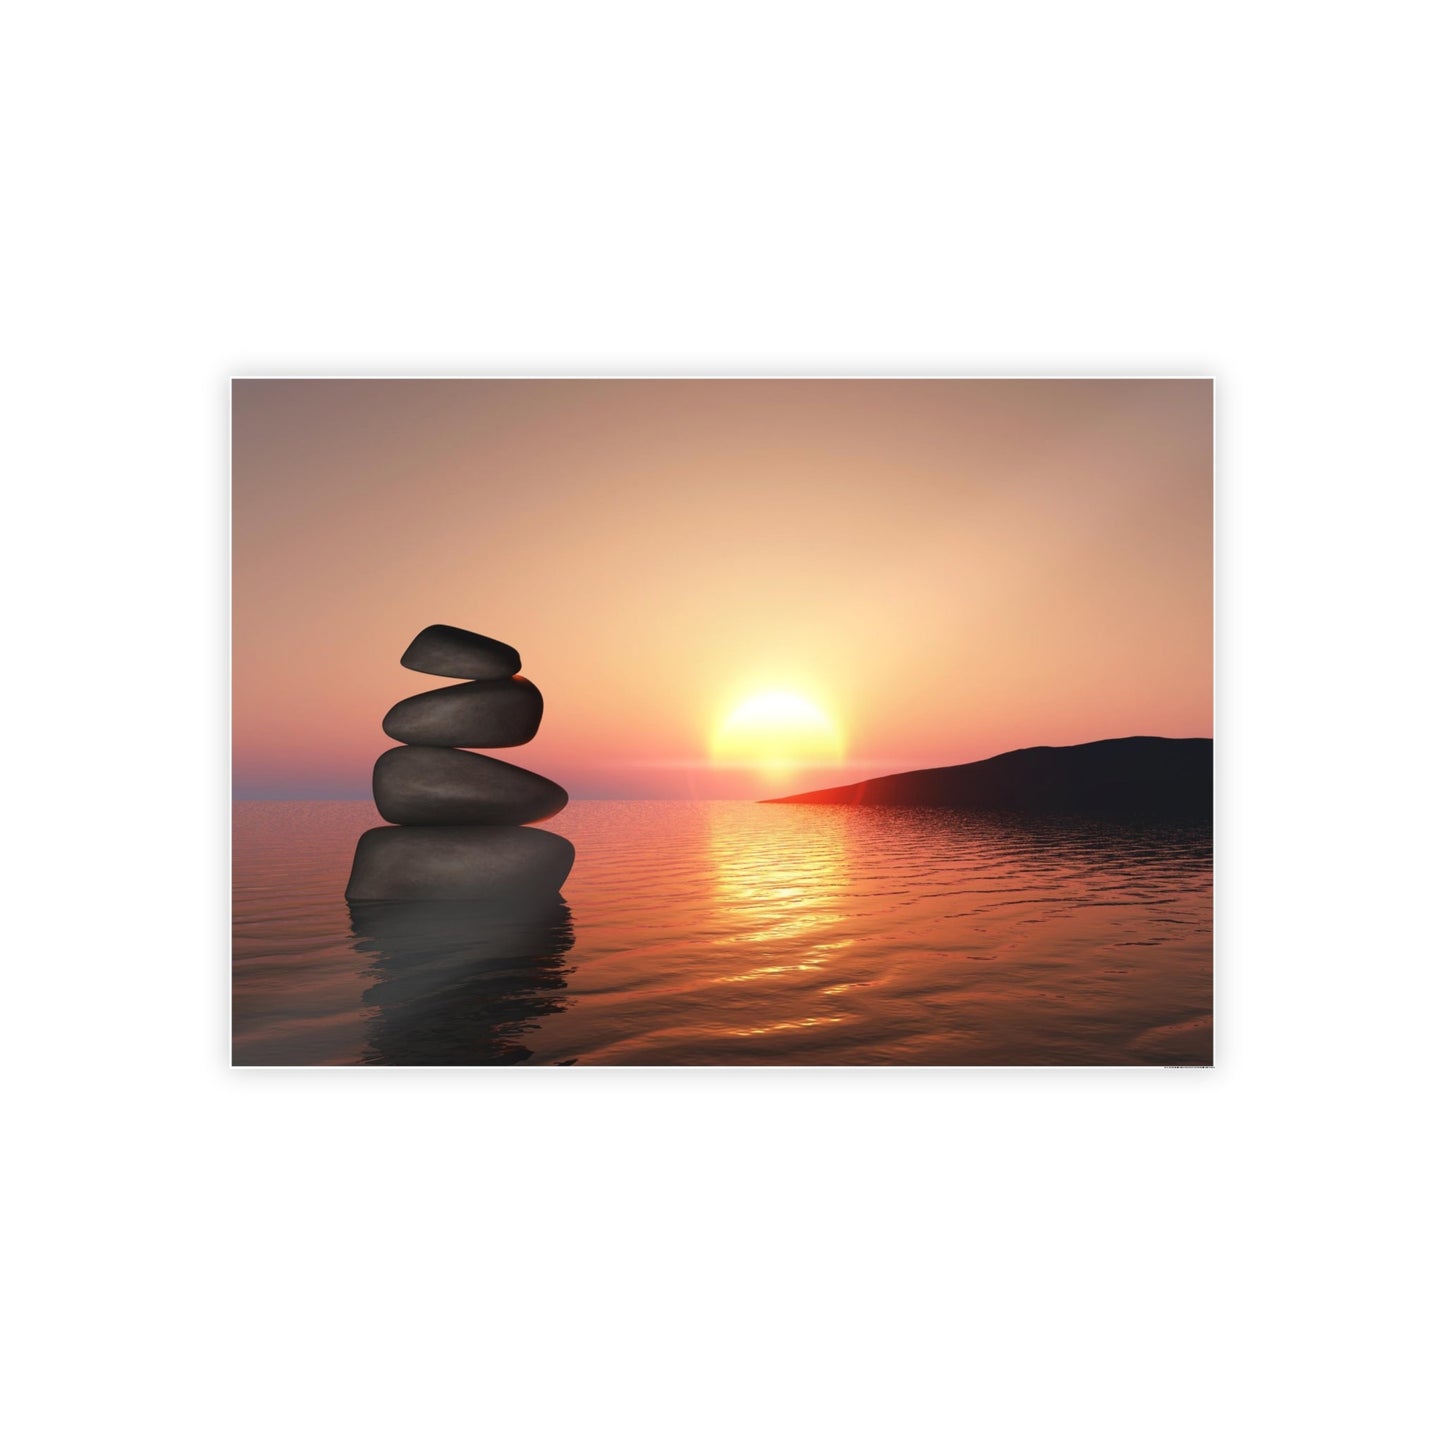 The Art of Relaxation: Canvas Print of a Peaceful Landscape